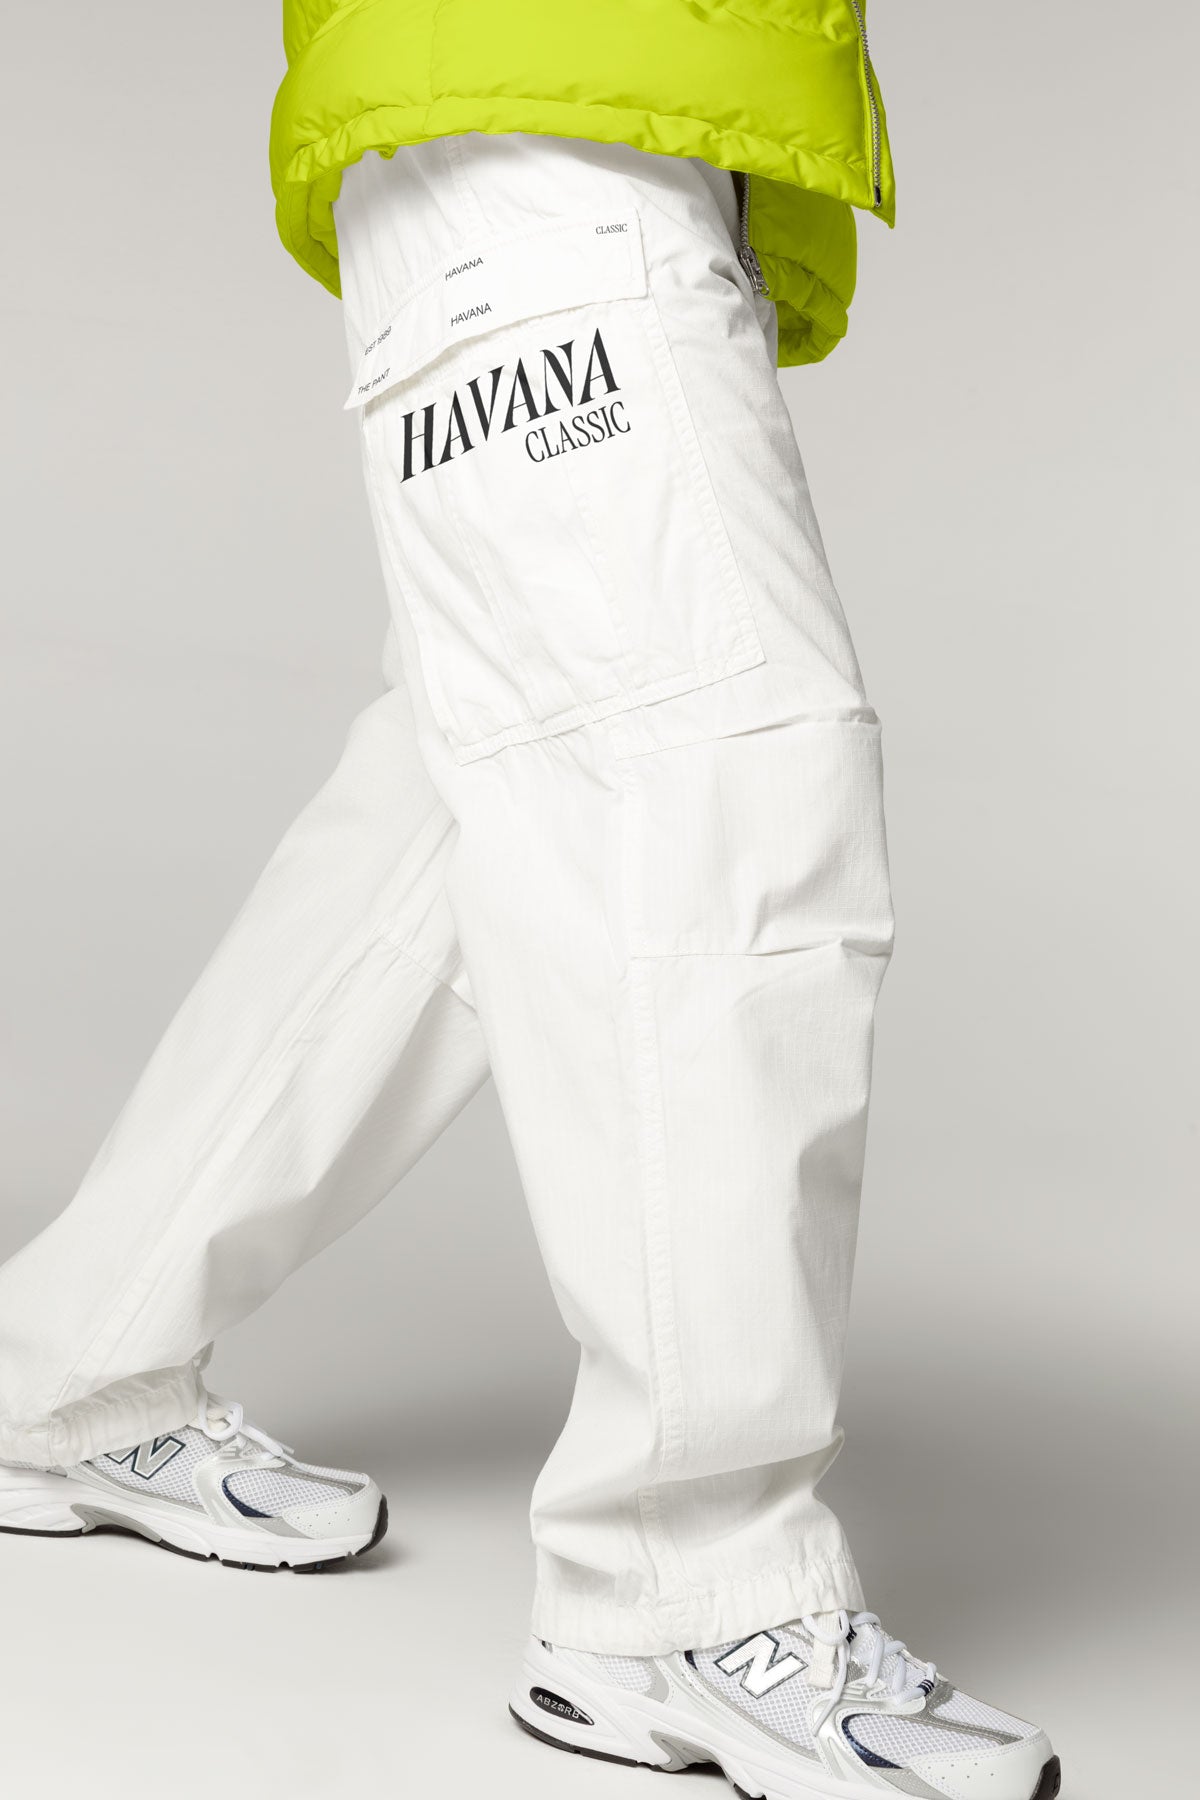 White pants with a custom logo printed on it